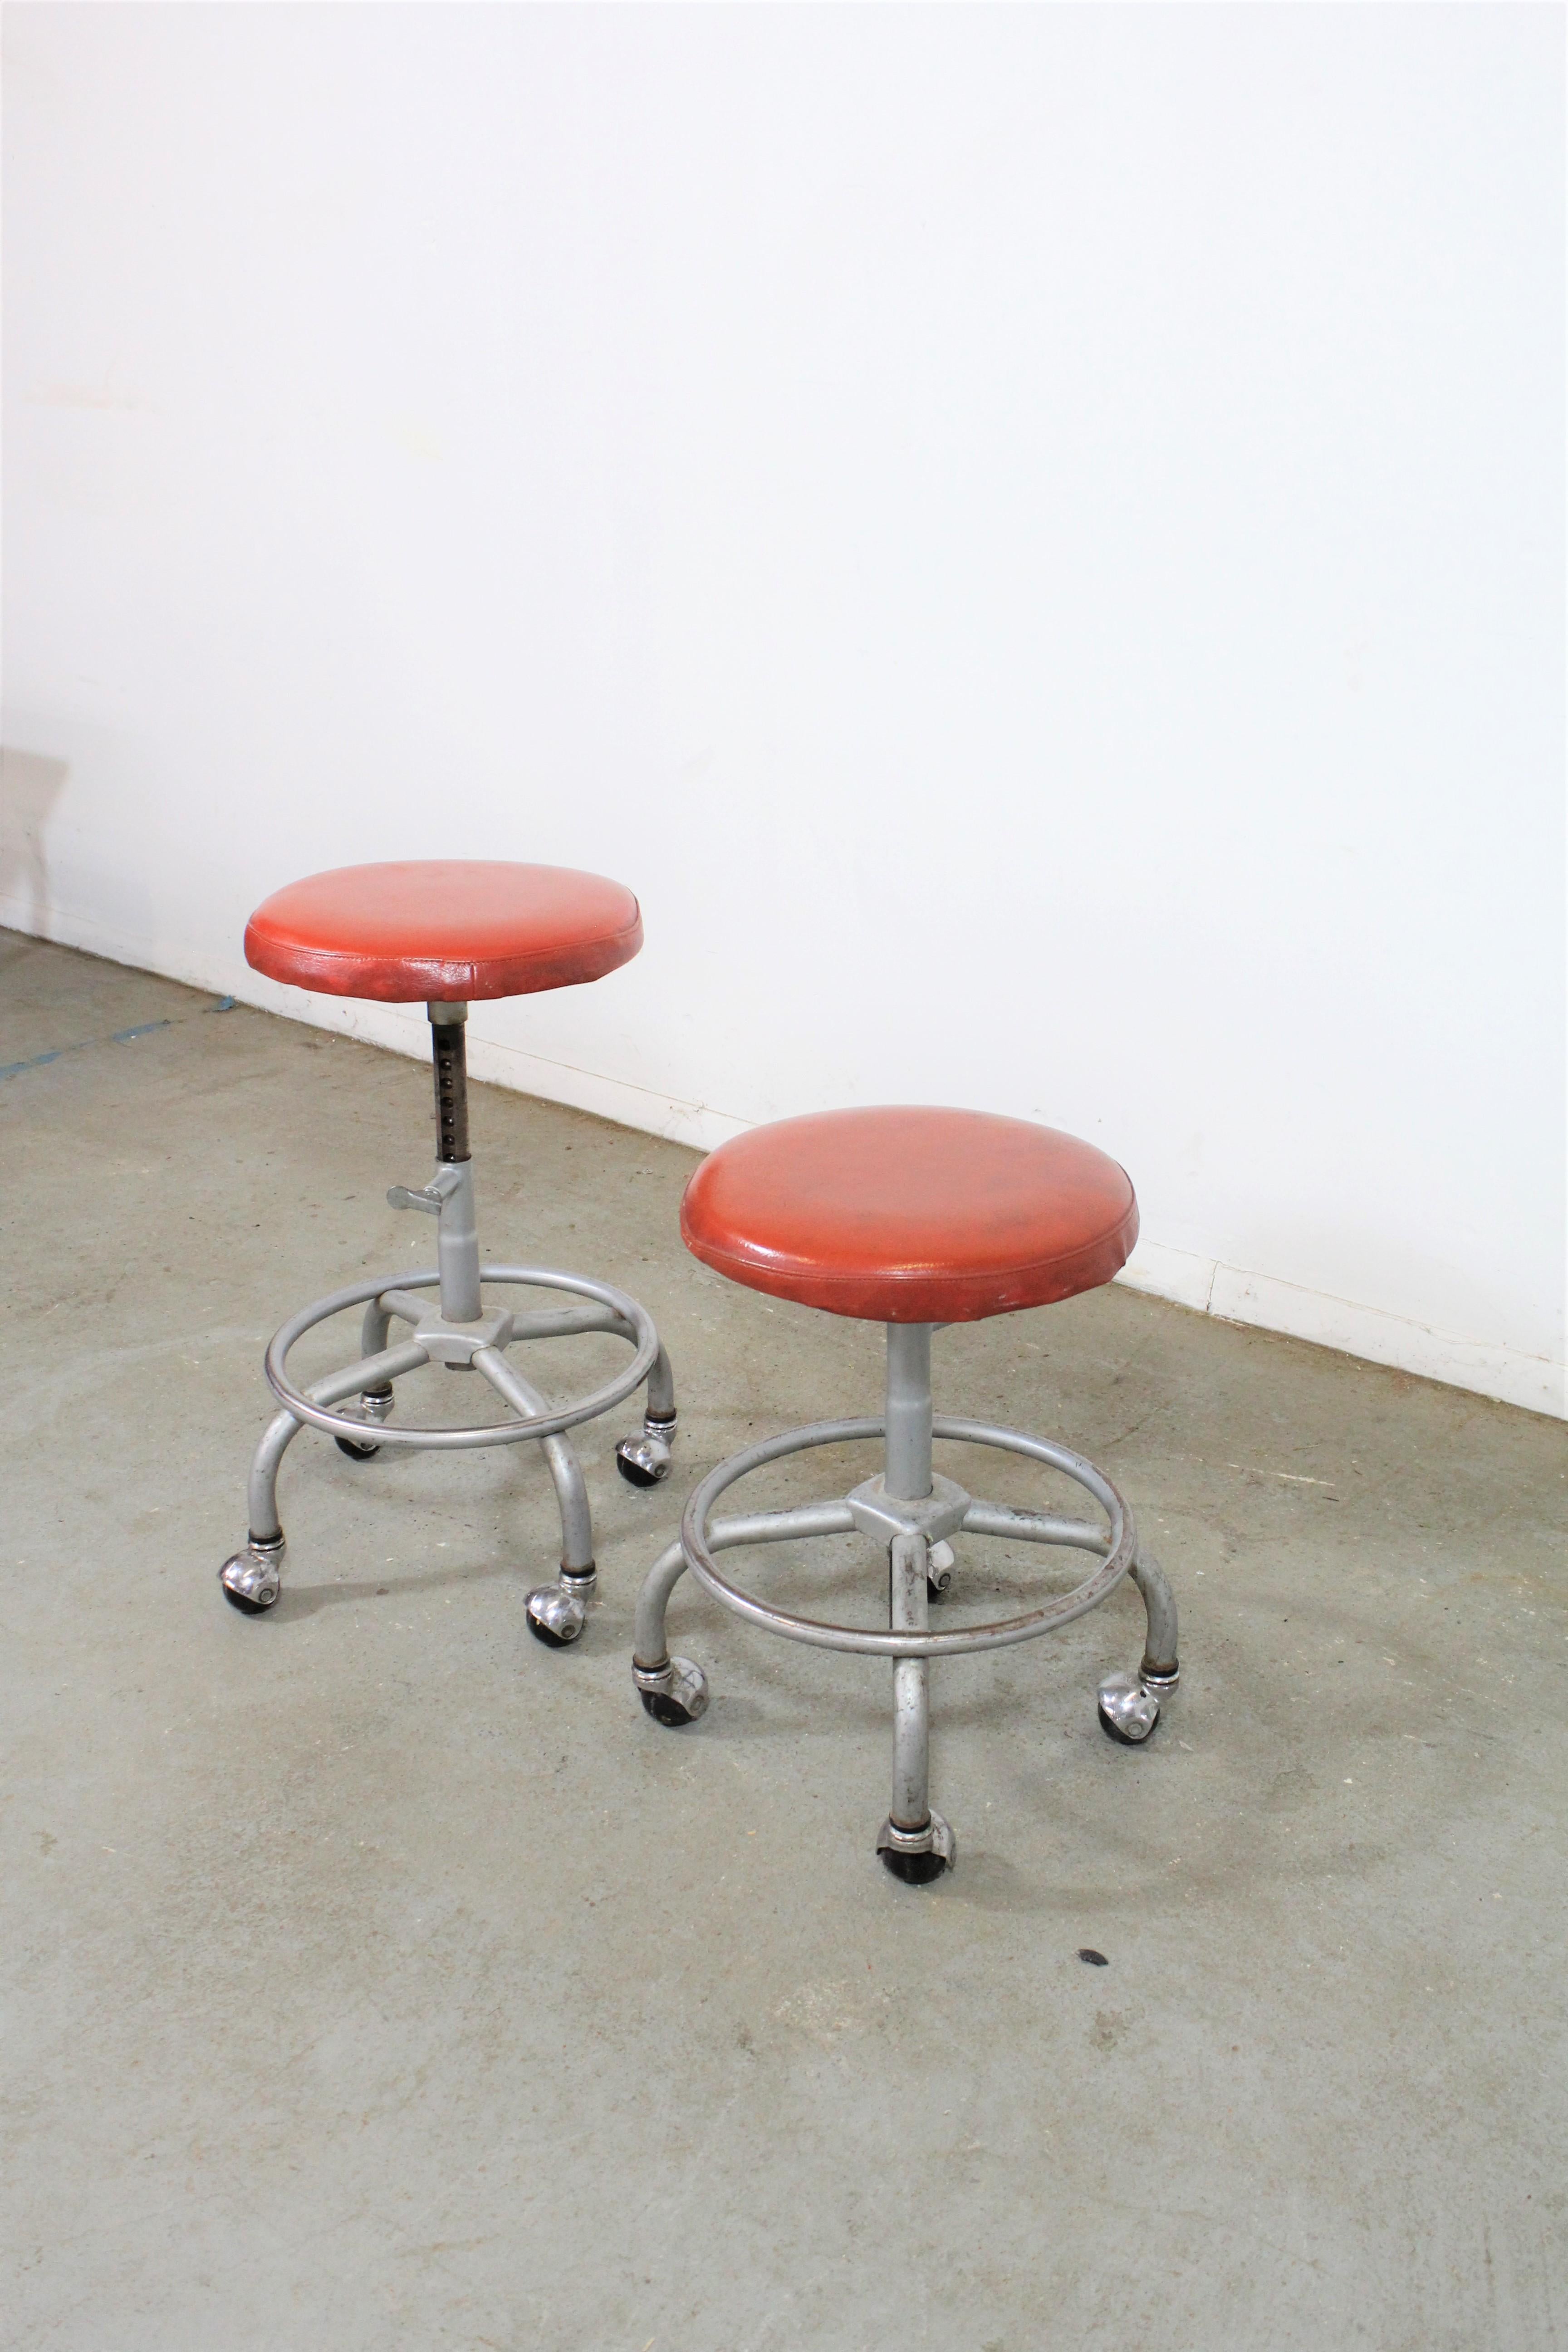 Pair of midcentury industrial swivel stools

Offered is a pair of midcentury industrial swivel stools. These stools are adjustable. The orange vinyl seats have staining and the chrome legs have patina. They are in good condition for their age,